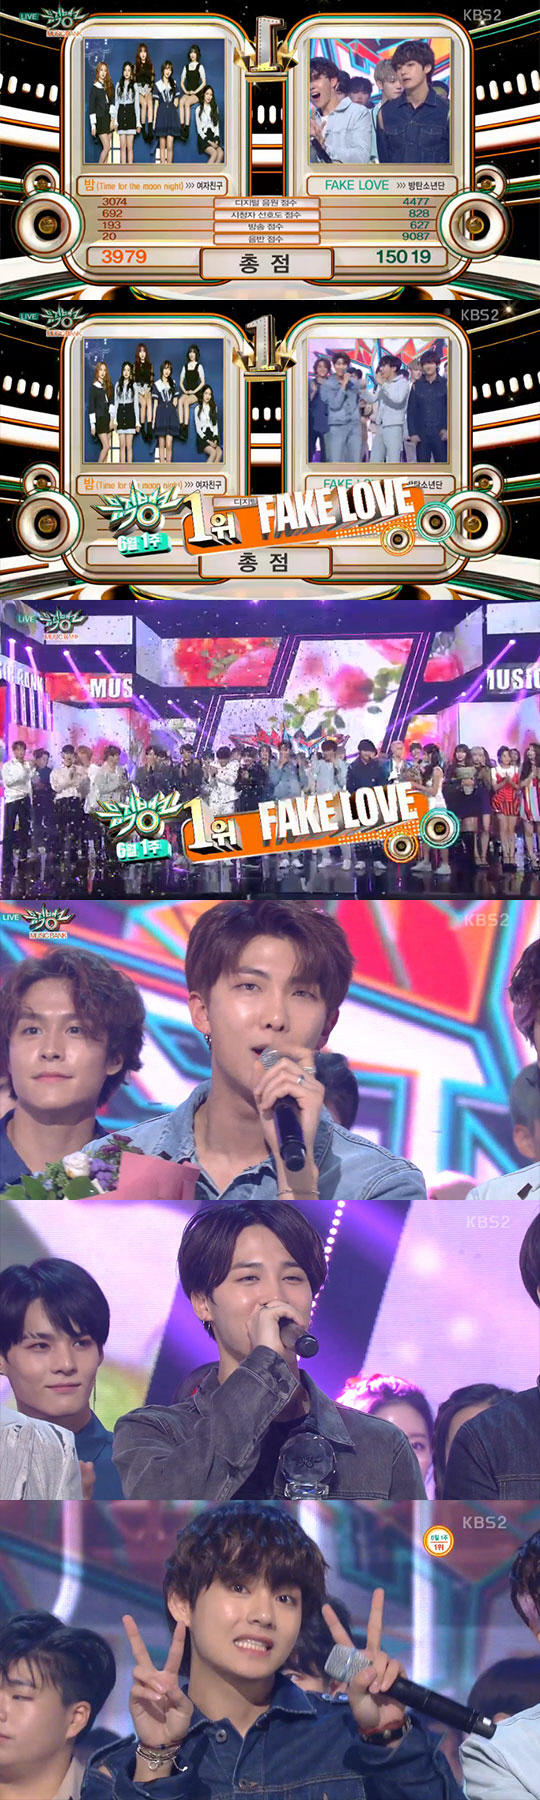 Achieved..15,000 Golden Towers.Music Bank BTS topped the list for two consecutive weeks, giving a sex-time awardHe continued his march.On the 1st, KBS2 Music Bank, BTS Fake Love defeated his girlfriend s Night and won first place for two consecutive weeks.The score was 9,000, and the total score was 15,000.SHINee Lee Tae-min, who was in charge of the special MC on the day, also said, Wow, 15,000 points.BTS said, I love Amy! You know this is the prize you gave me? And thanked Fandom Amy.BTS took a selfie on the first stage as promised earlier and won a six-time awardcelebrated.As a result, BTS will receive a six-time award in this Fake Love activityIn addition to Fake Love, the album Unforgettable Truth also added to the 9th place on the K chart.Travel of red puberty is third, Twices Wats Love? is fourth, and Rocco - Hwasas Jujuma is fifth.Momo Land s Fountain, icon I Loved, Nilo Ginaoda, BTS Unforgettable Truth, Mama Mu Starlighting Night took 10th place.The special MC of the day was played by Lee Tae-min of SHINee.AOA played a comeback stage with Supa Dupa - Bingle Bangle, SHINee Derryer and Samuel Tin Aiser.SHINee gave a self-introduction that seemed to be back to his rookie days, and AOA gave a thank-you saying I missed you Elvis.Pristin V presented the unit de V stage, which emits Billens charisma with Spotlight and My Own.As a special guest of Music Bank on this day, beauty creator RISABAE appeared and showed a different charm with a new song E.N.C.Music Bank featured (girls) children, Gracie, Khan, Enflying, NTB, Bigton, The Eastlight, Dream Catcher, Unity, RISABAE, Lee Tae-hee and Hwang In-sun.Next week, Wanna One, Yubin and Promis 9 were announced as comeback singers.